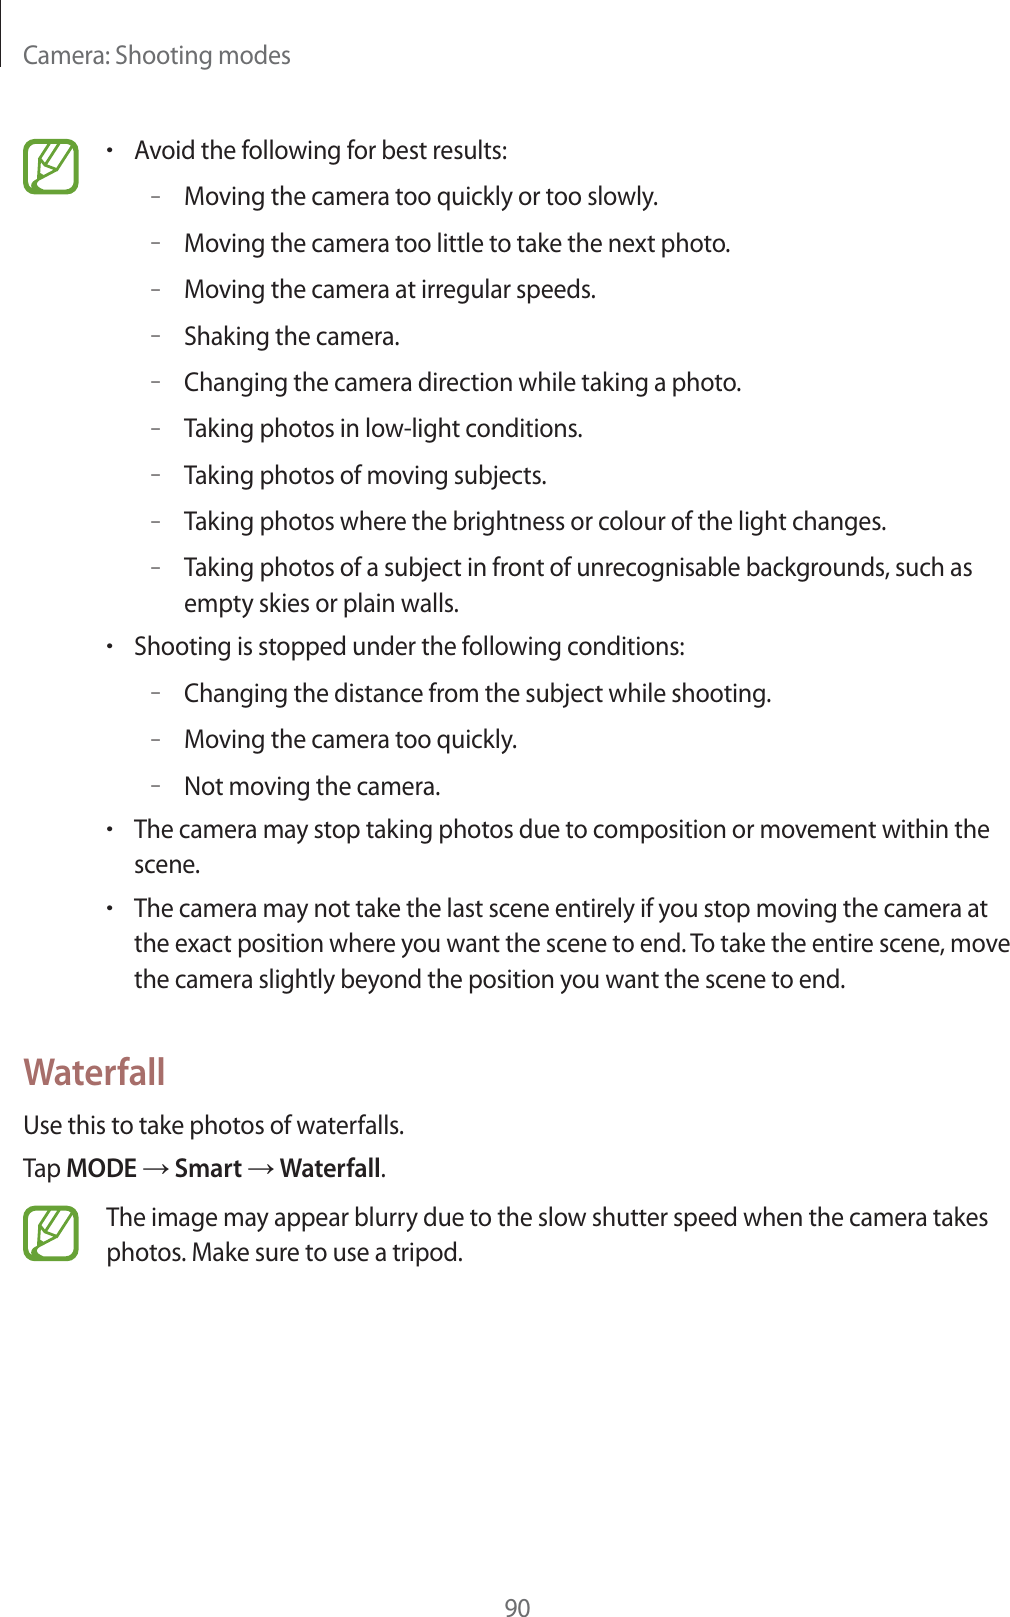 Camera: Shooting modes90rAvoid the following for best results:–Moving the camera too quickly or too slowly.–Moving the camera too little to take the next photo.–Moving the camera at irregular speeds.–Shaking the camera.–Changing the camera direction while taking a photo.–Taking photos in low-light conditions.–Taking photos of moving subjects.–Taking photos where the brightness or colour of the light changes.–Taking photos of a subject in front of unrecognisable backgrounds, such as empty skies or plain walls.rShooting is stopped under the following conditions:–Changing the distance from the subject while shooting.–Moving the camera too quickly.–Not moving the camera.rThe camera may stop taking photos due to composition or movement within the scene.rThe camera may not take the last scene entirely if you stop moving the camera at the exact position where you want the scene to end. To take the entire scene, move the camera slightly beyond the position you want the scene to end.WaterfallUse this to take photos of waterfalls.Tap MODE  Smart  Waterfall.The image may appear blurry due to the slow shutter speed when the camera takes photos. Make sure to use a tripod.